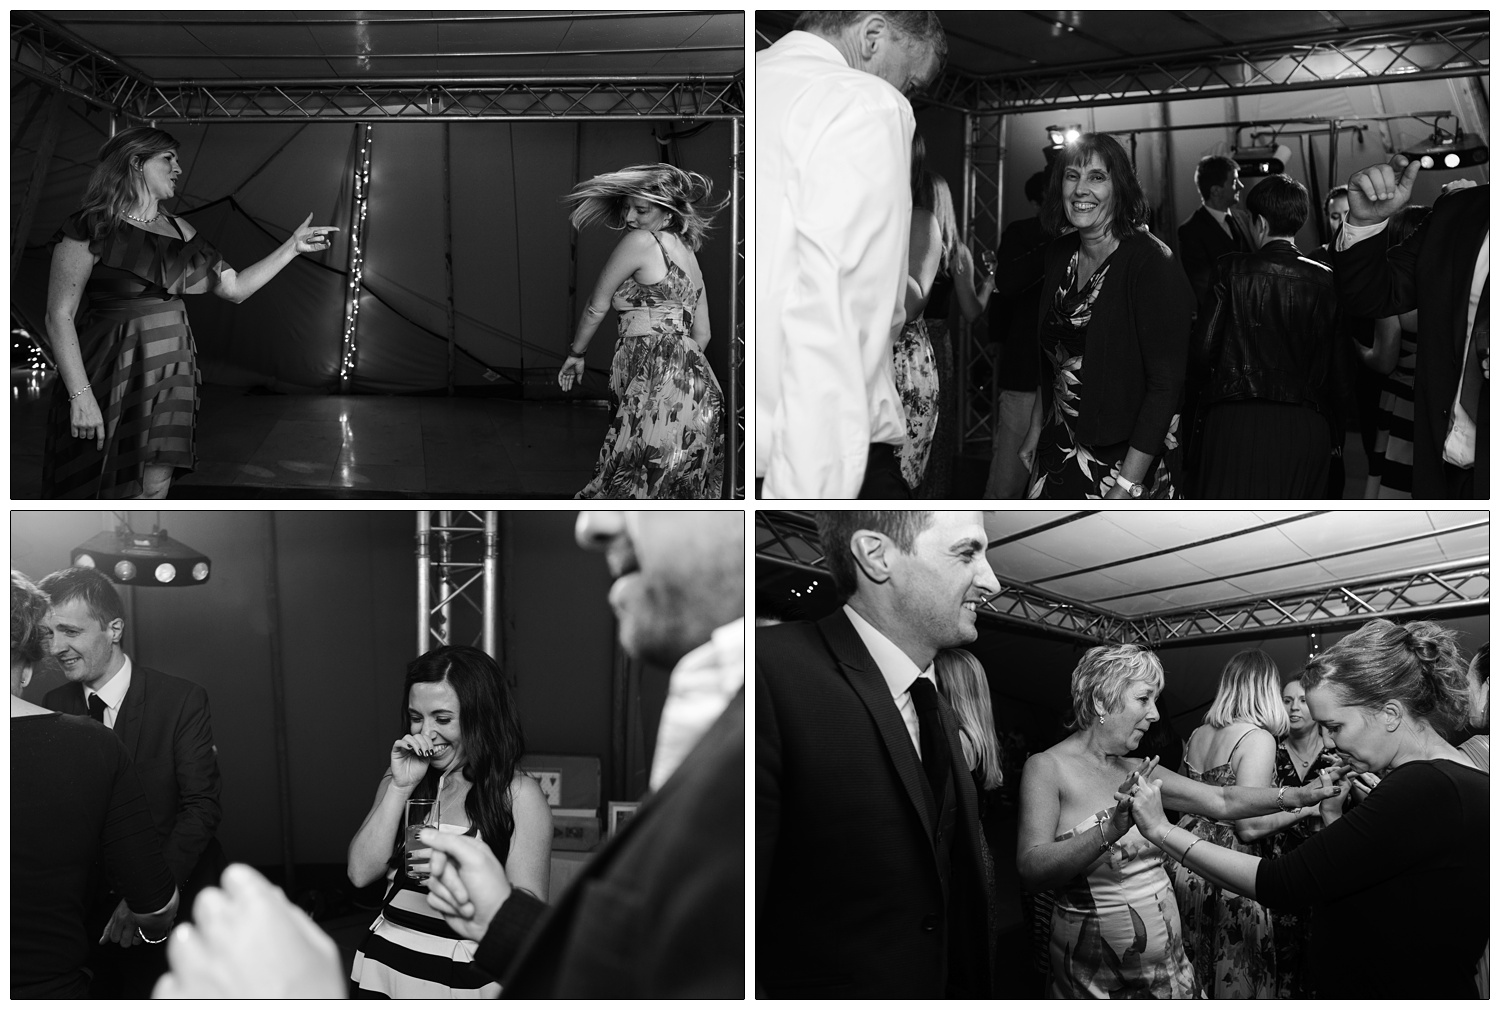 Reportage style black and white photographs at a wedding reception near Colchester. The Browning Bros. Chalkney Water Meadows venue. Two women are dancing, one is shaking her head and the other is pointing. The bride is laughing in a stripy dress.